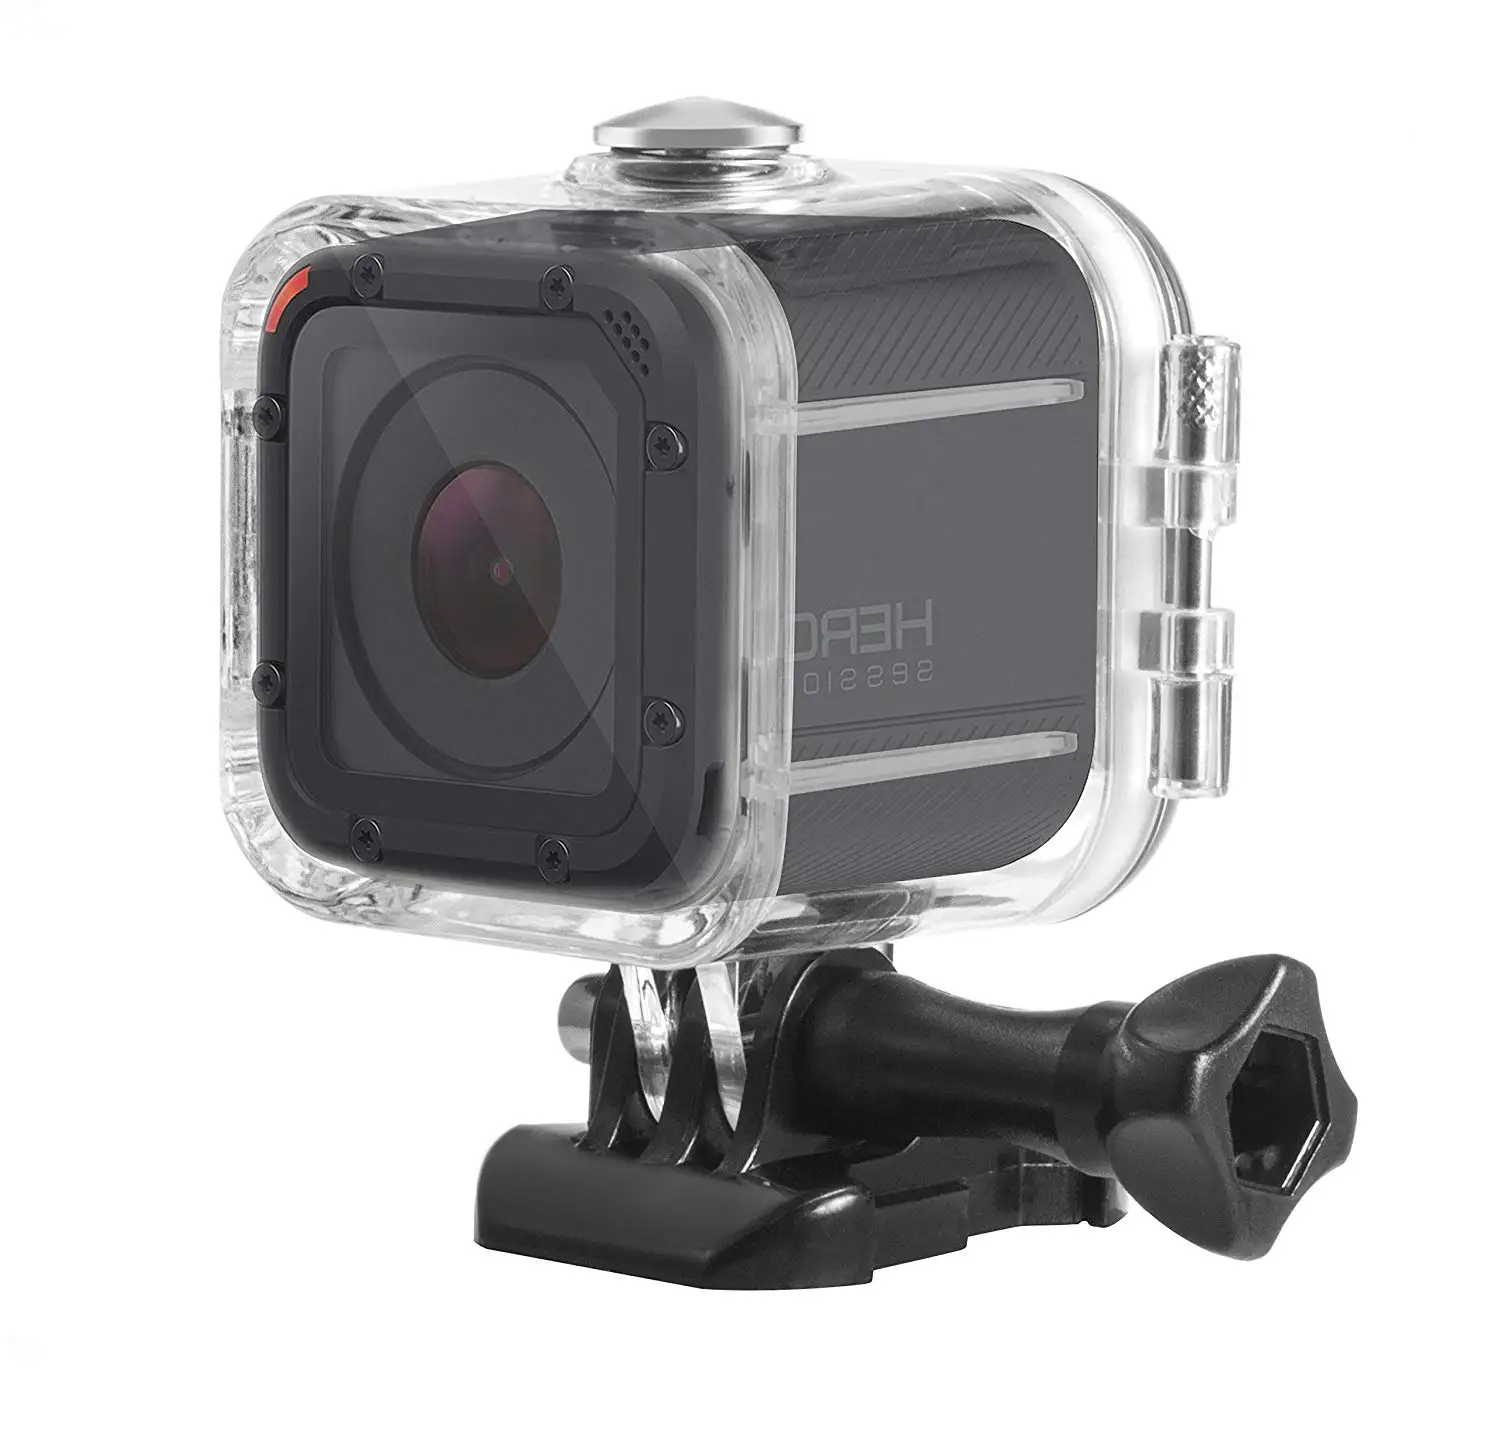 Go Pro 4 Session Accessories Frame For Gopros Hero5 And Hero4 Session Camera Buy Go Pro Session Accessories Go Pro Session Waterproof Case Go Pro Session Frame Product On Alibaba Com